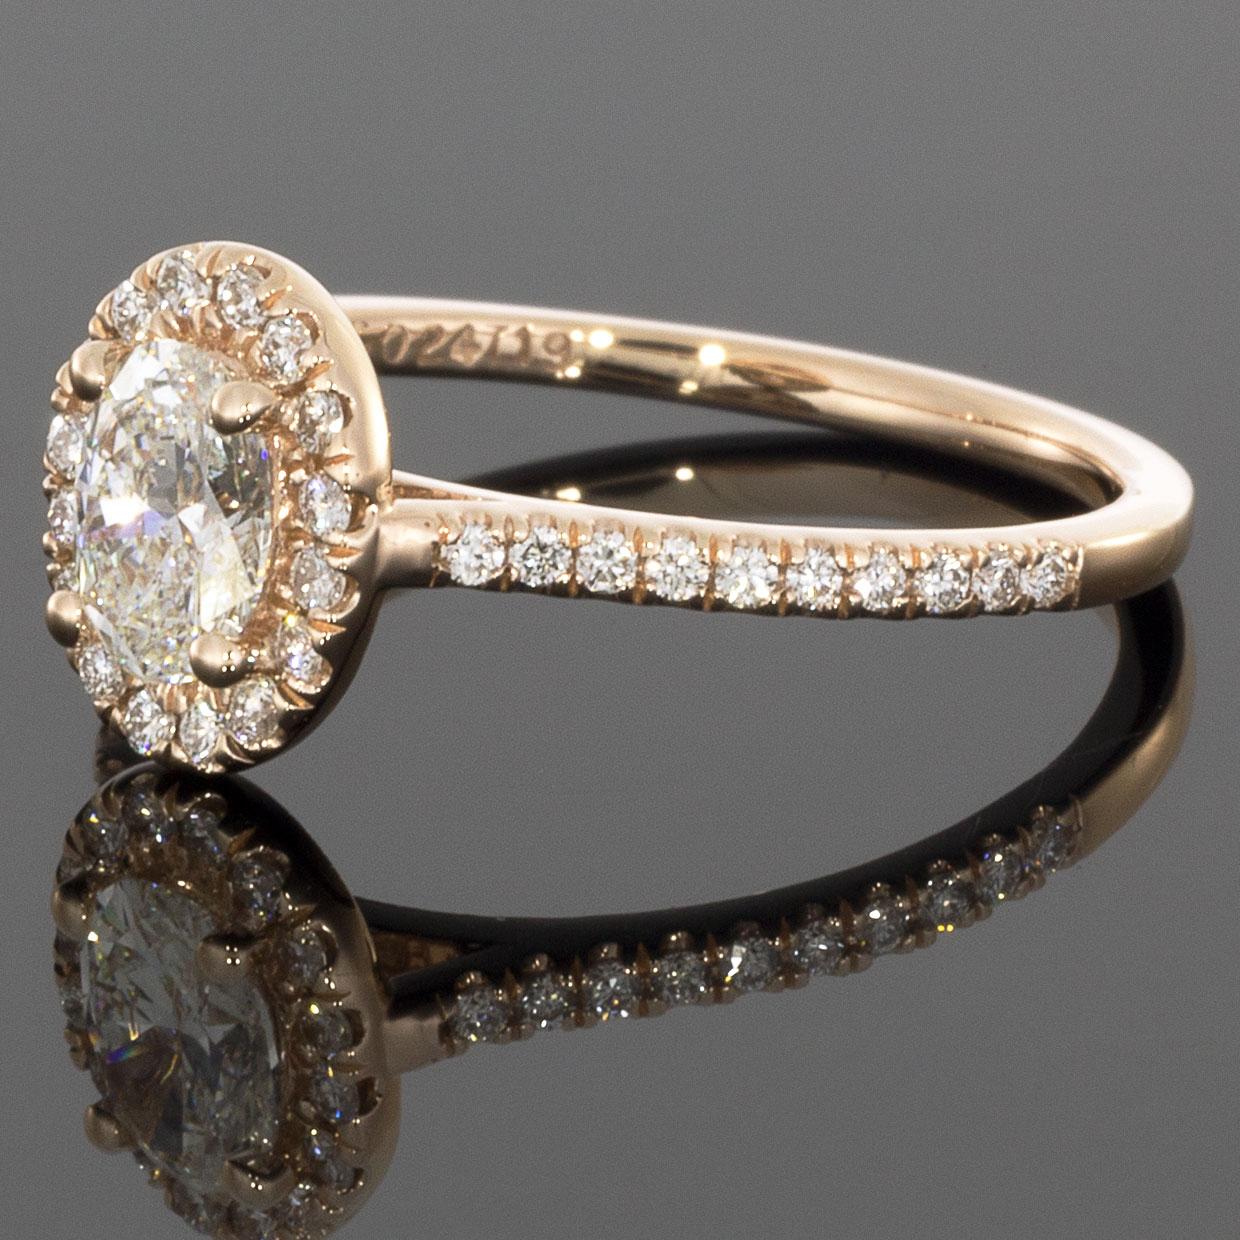 Item Details:
Estimated Retail - $4,350.00
Brand - Martin Flyer
Metal - 14 Karat Rose Gold
Total Carat Weight (TCW) - 0.77 ctw
Certification/Grading - Yes (GIA)
Style - Halo Engagement Ring
Ring Size - 6.50
Sizable Yes
Width - 1.60 mm

Stone 1